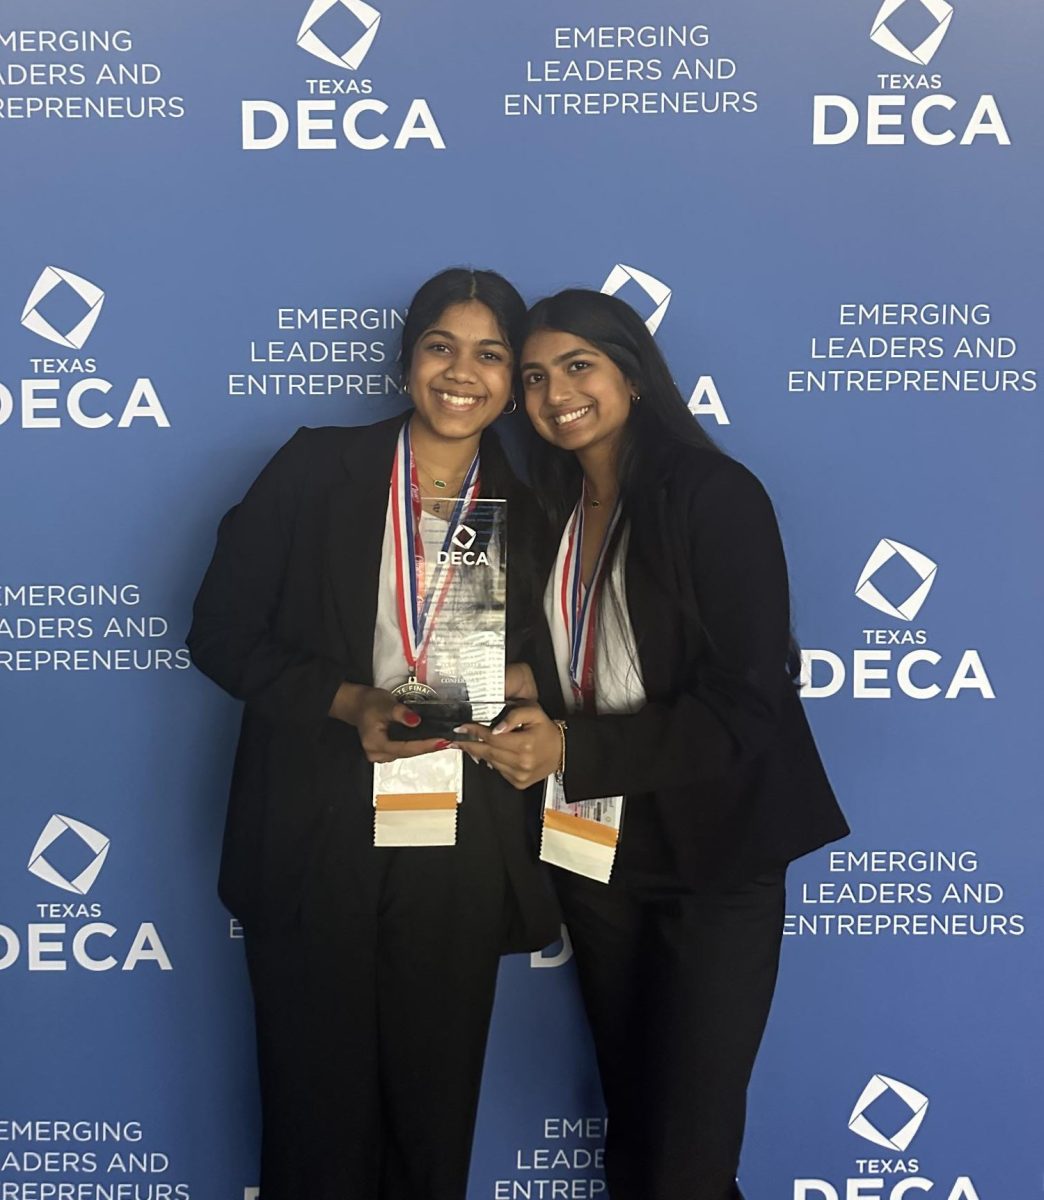 Juniors+Divya+Bapanapalli+and+Pushpa+Nukala+joined+DECA+for+different+reasons.+For+Bapanapalli%2C+the+club+was+a+foray+into+her+future+career%2C+but+Nukala+joined+solely+because+her+friends+joined.+Their+event%2C+sports+marketing%2C+was+not+their+first+venture+into+partnership.+During+their+sophomore+year%2C+the+duo+partnered+together+for+another+event+in+the+hospitality+sector%2C+sports+entertainment+marketing.+++